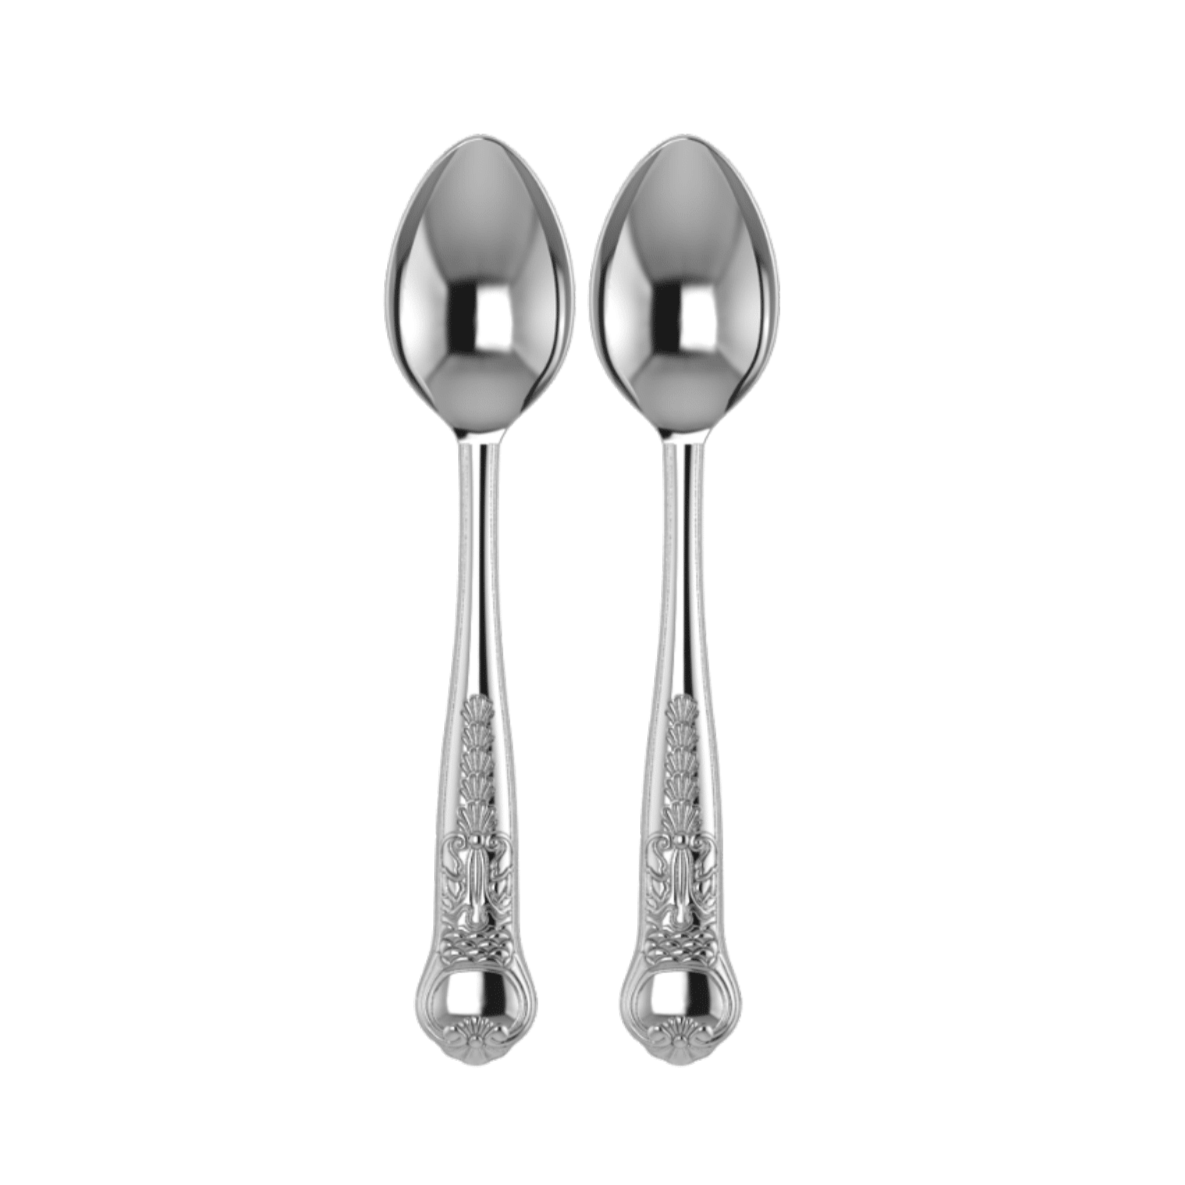 Sterling Silver Tea Spoon Set - The Italianate Collection